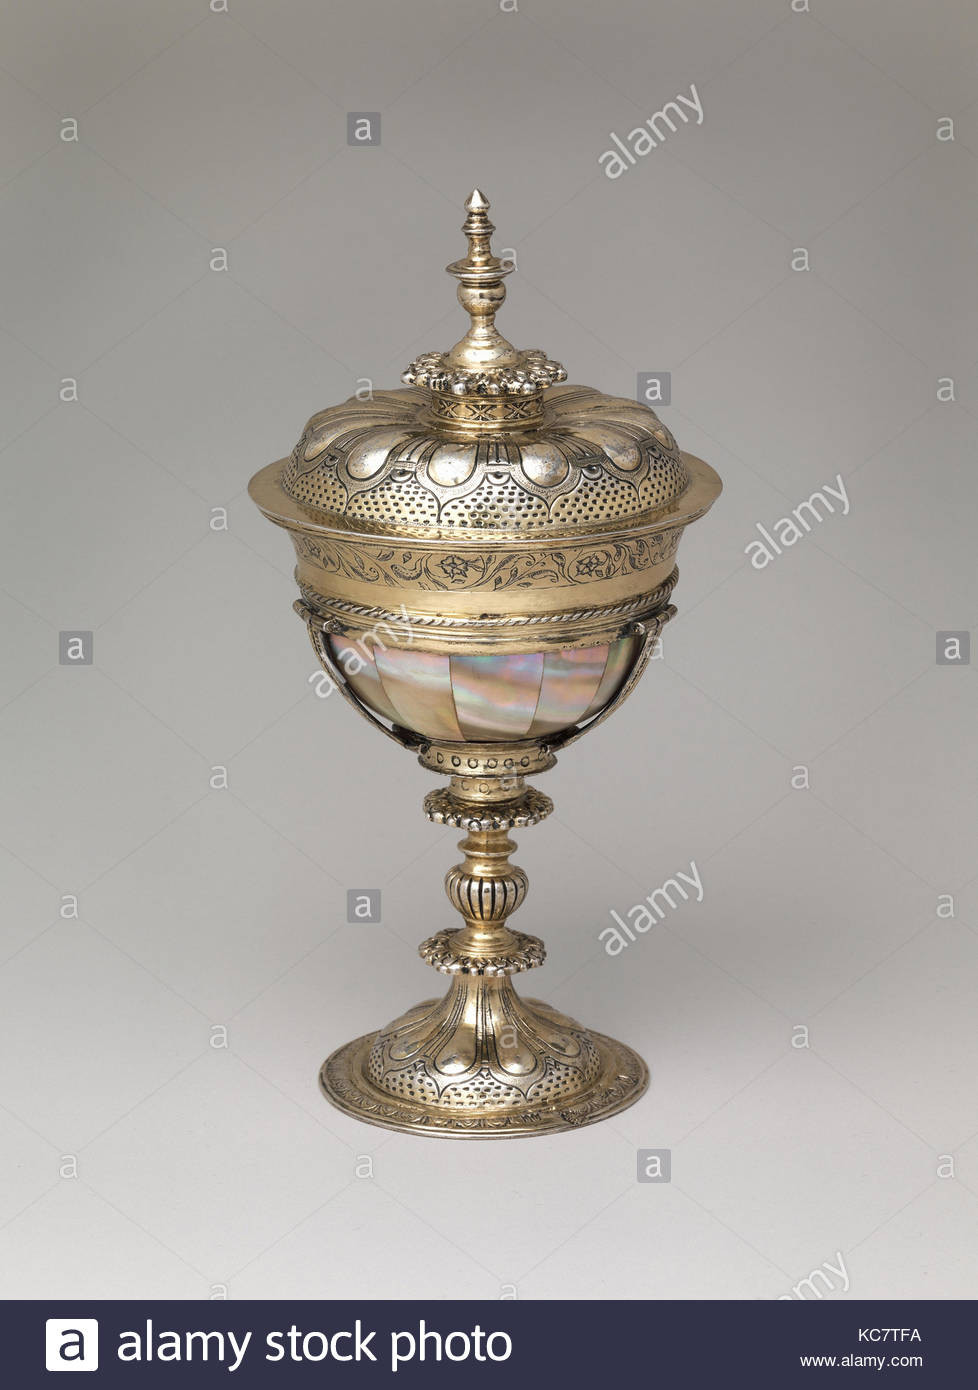 10 Perfect Brass Compote Vase 2024 free download brass compote vase of 11 7 x w stock photos 11 7 x w stock images alamy inside cup with cover r w british 1590 91 british london